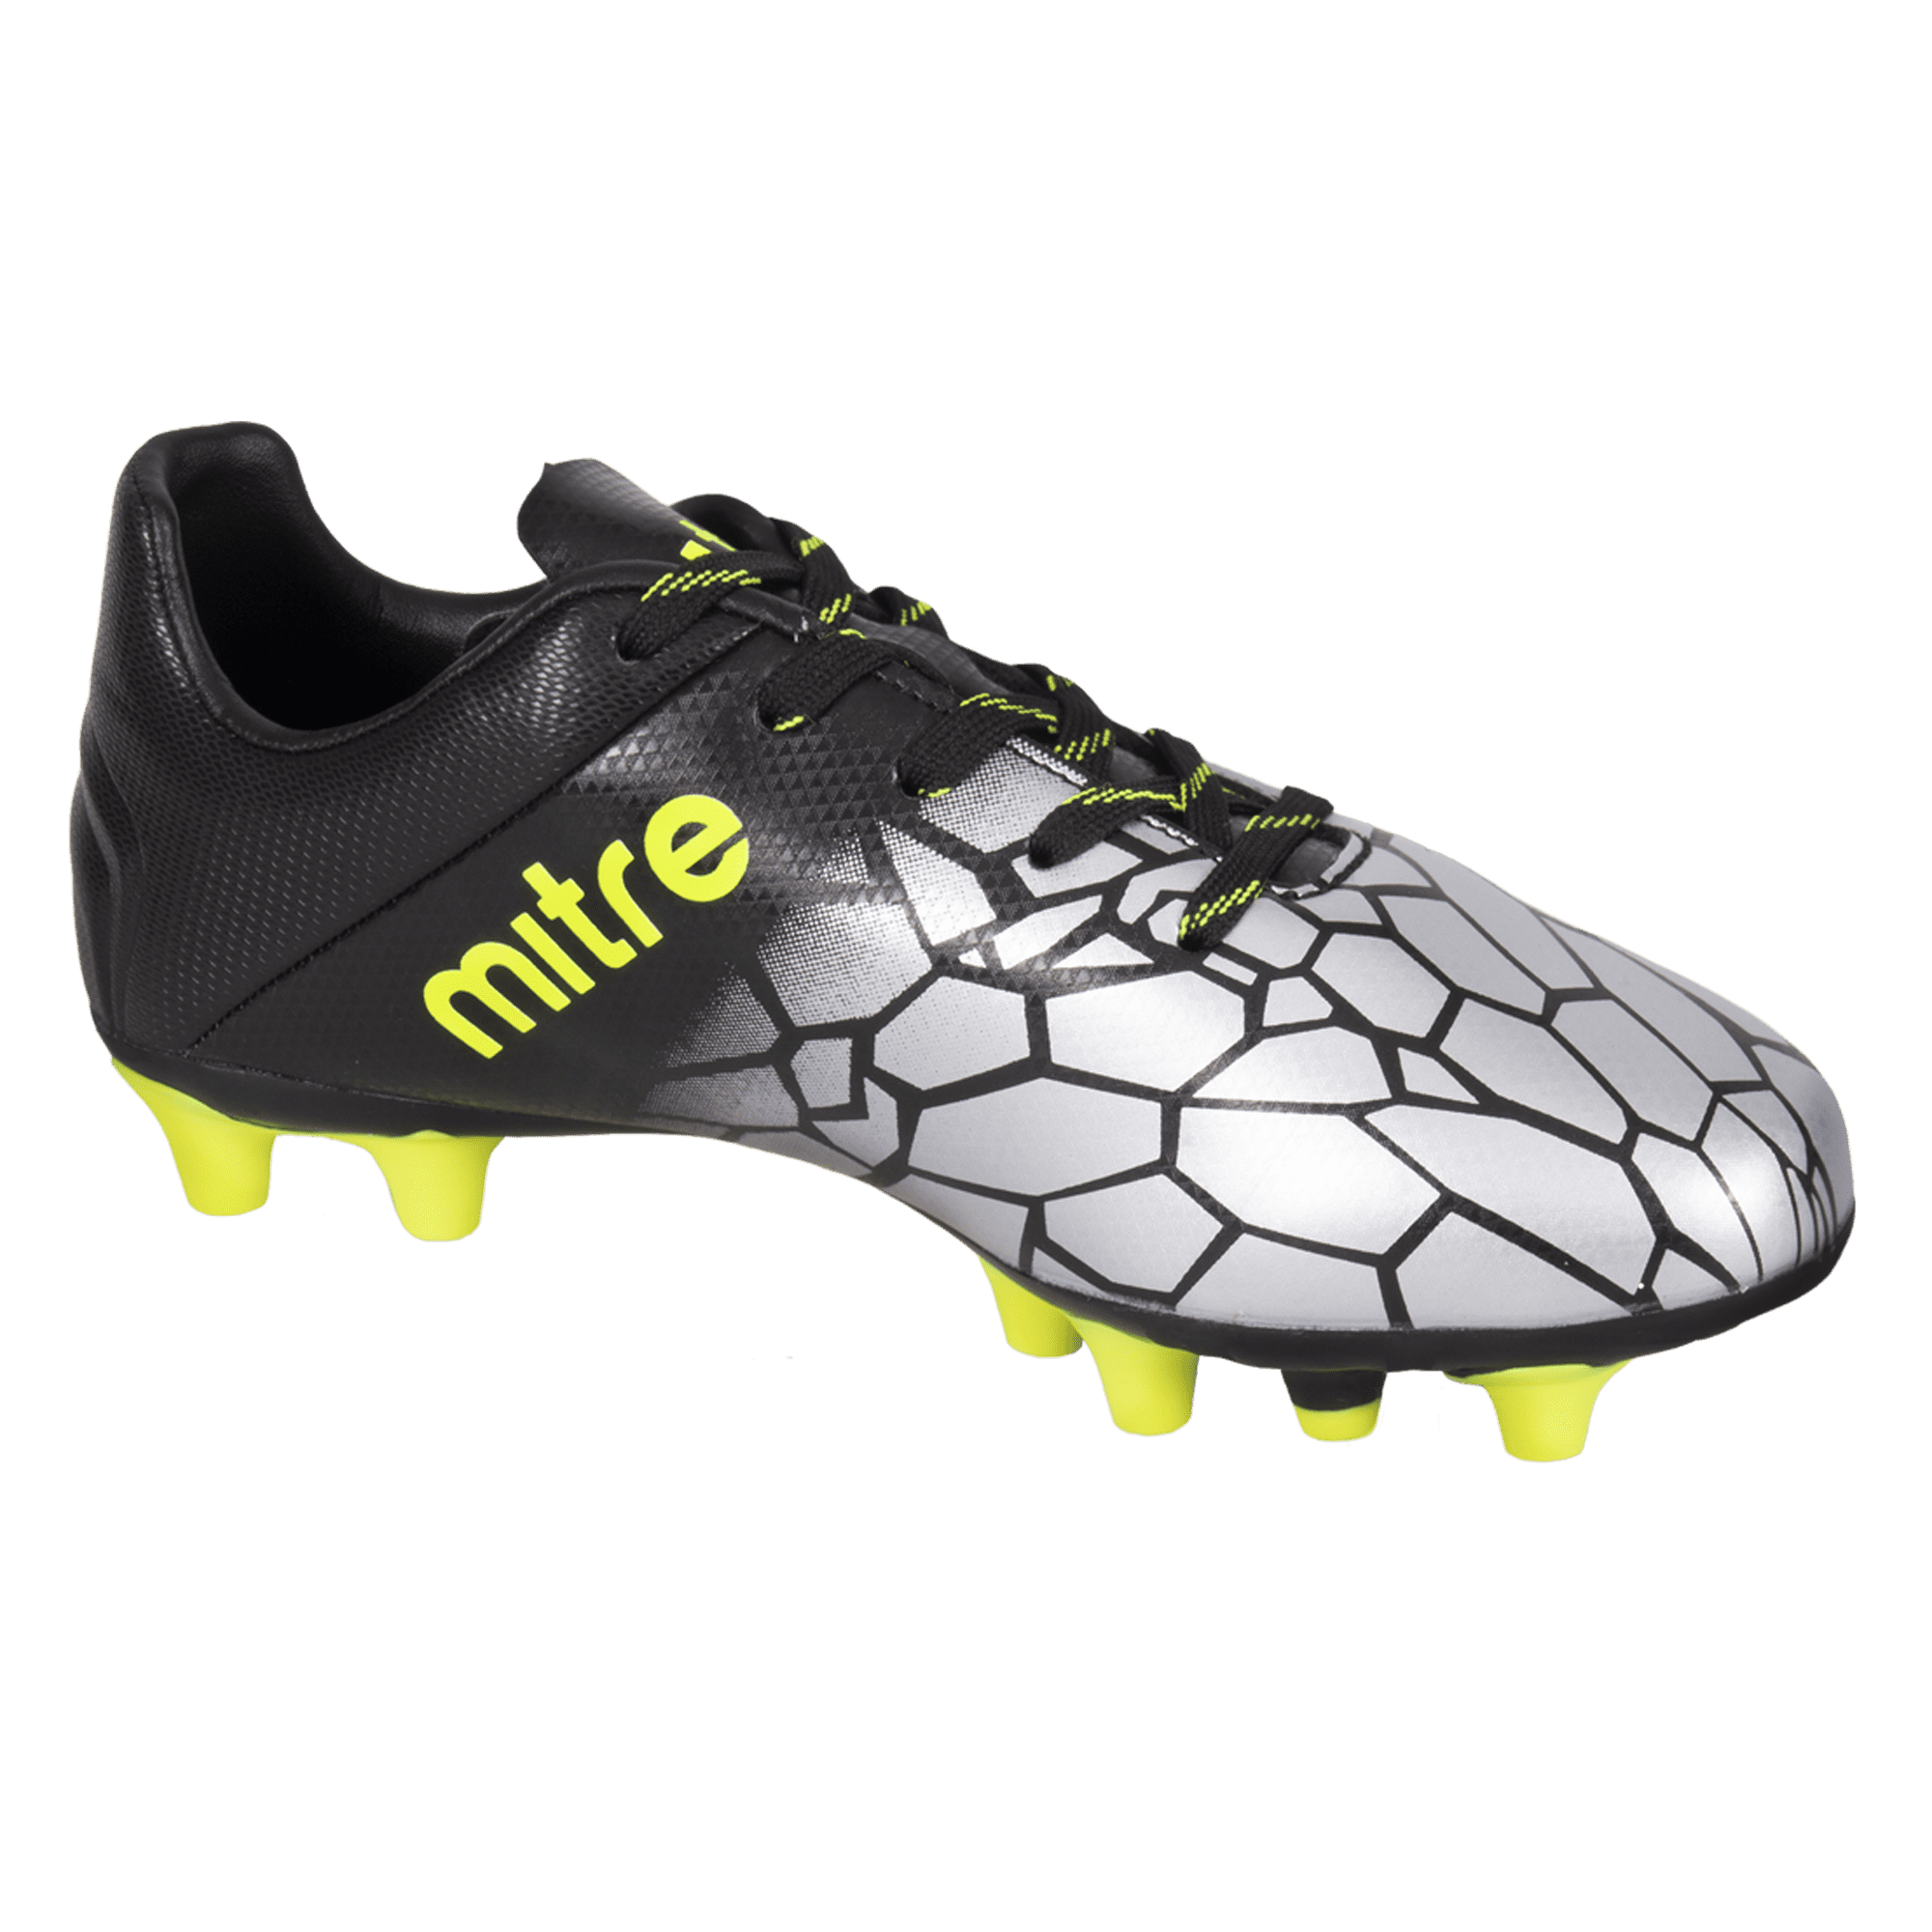 soccer cleats youth walmart